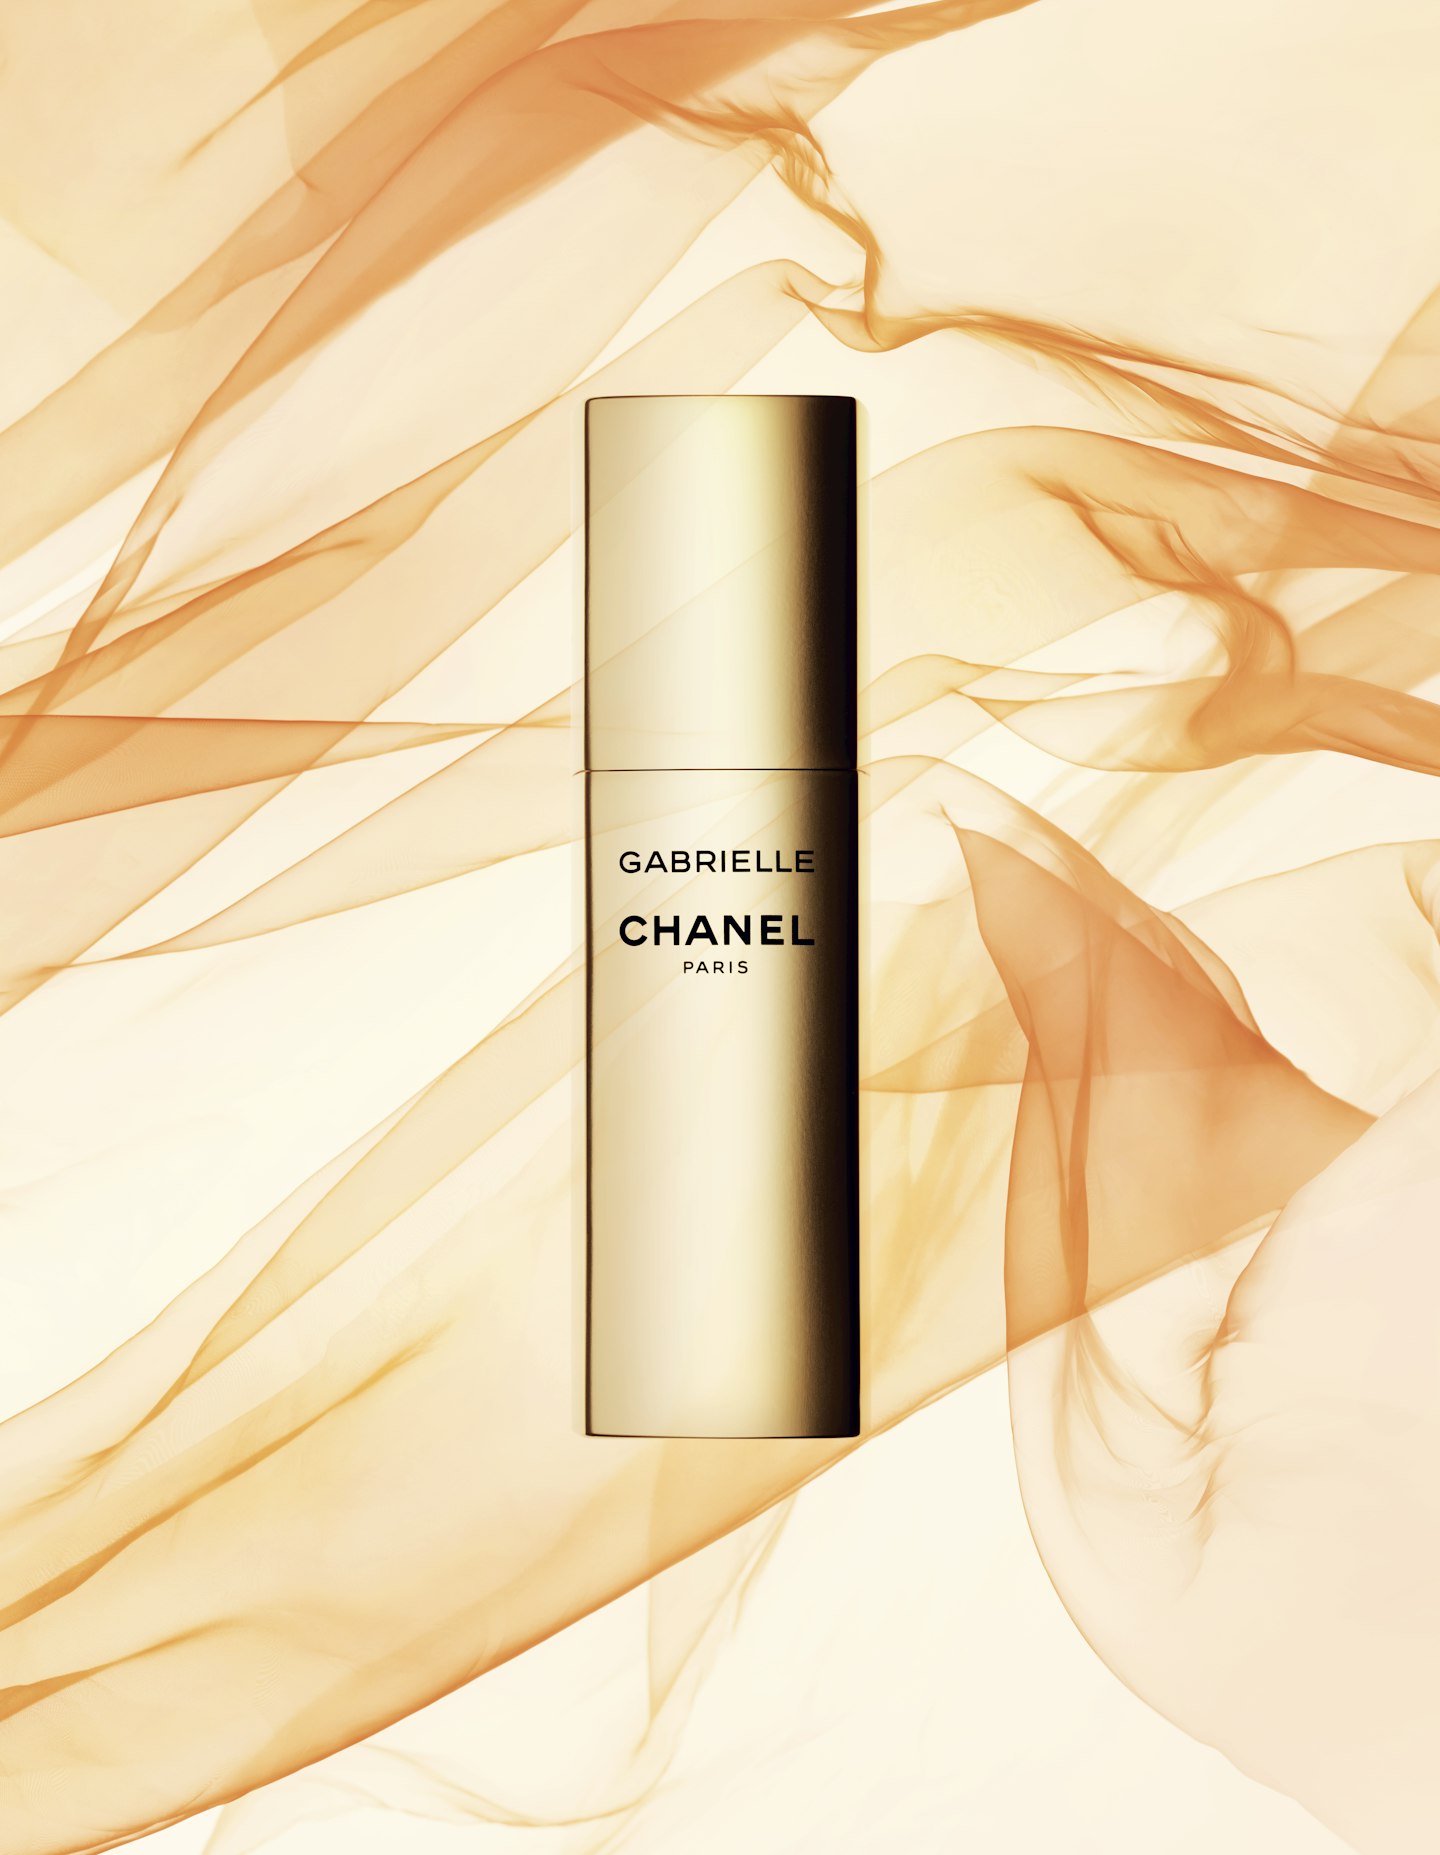 Chanel Just Launched A Brand New Perfume